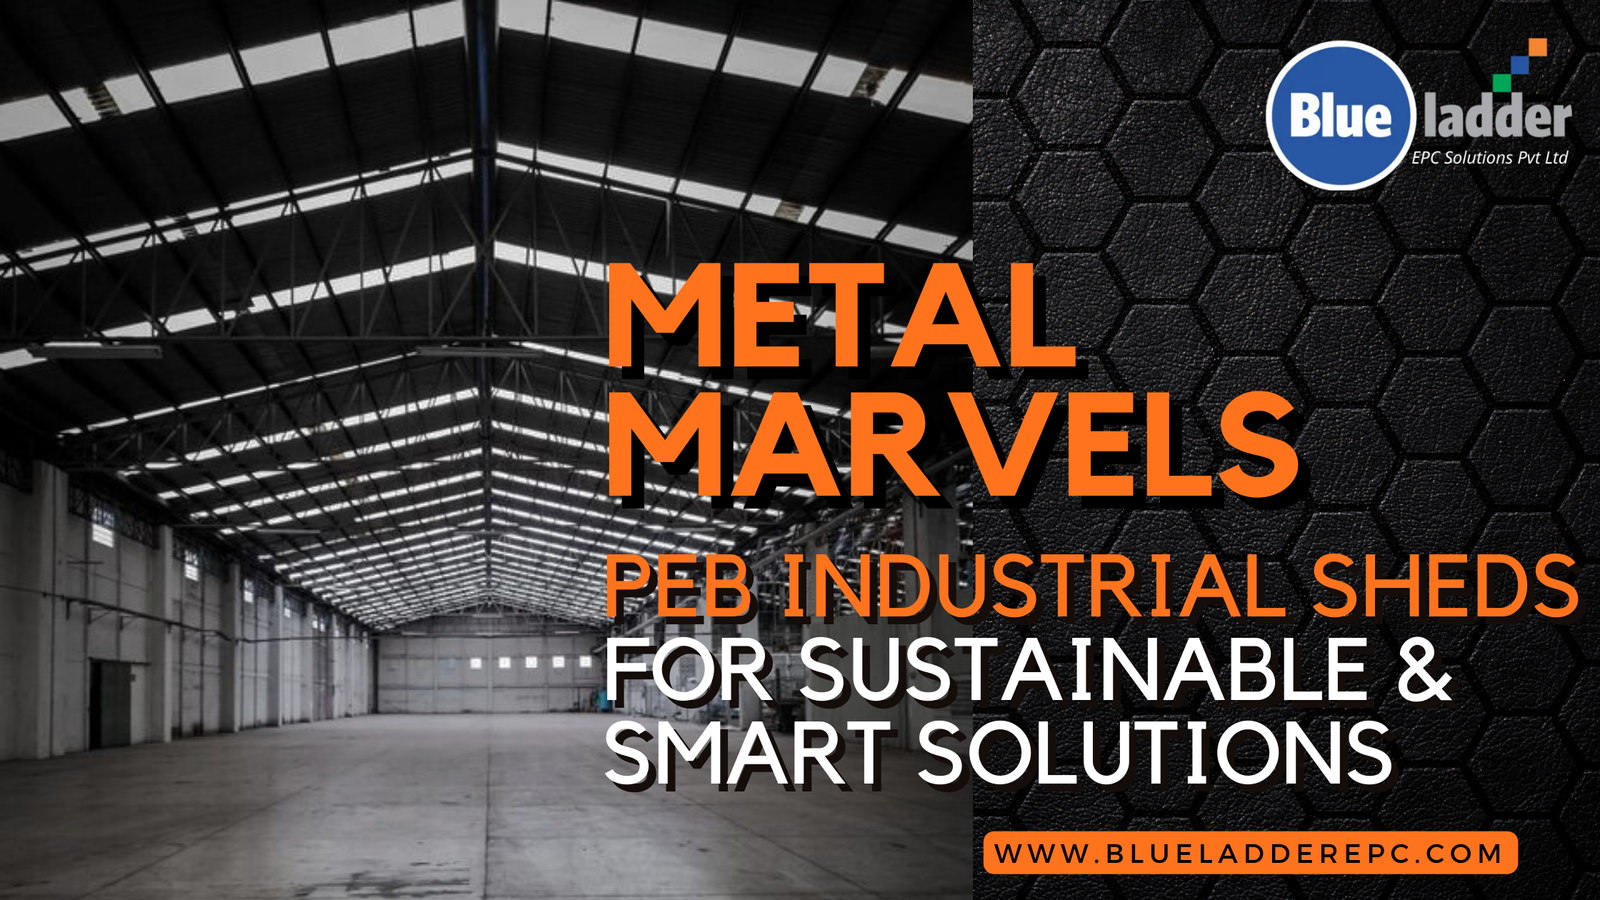 PEB industrial shed, a durable and versatile building solution for various industrial needs.